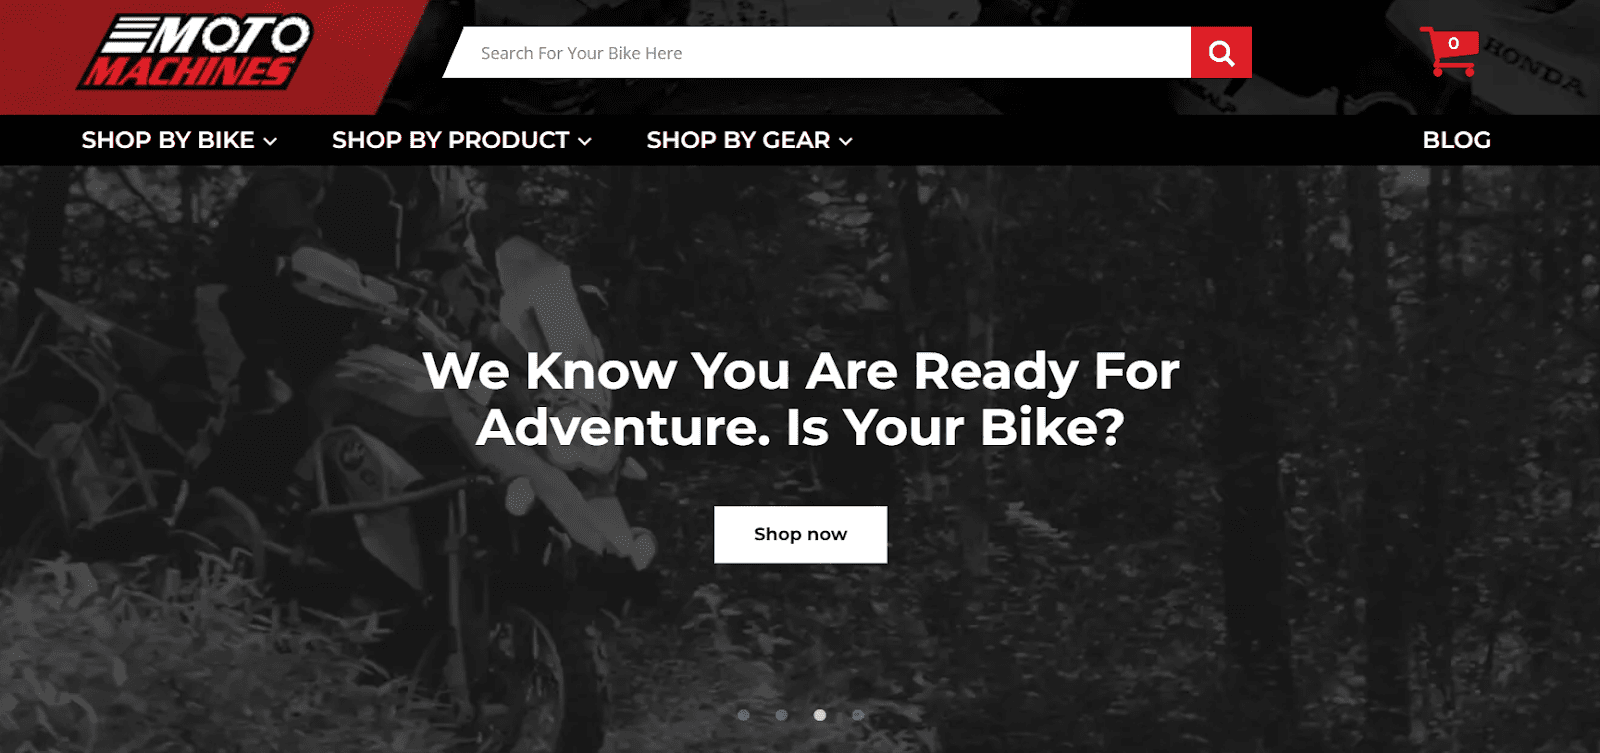 screenshot of the Moto Machines homepage, with an image of a bike in a forest and the line "we know you are ready for adventure. is your bike?" next to a shop CTA